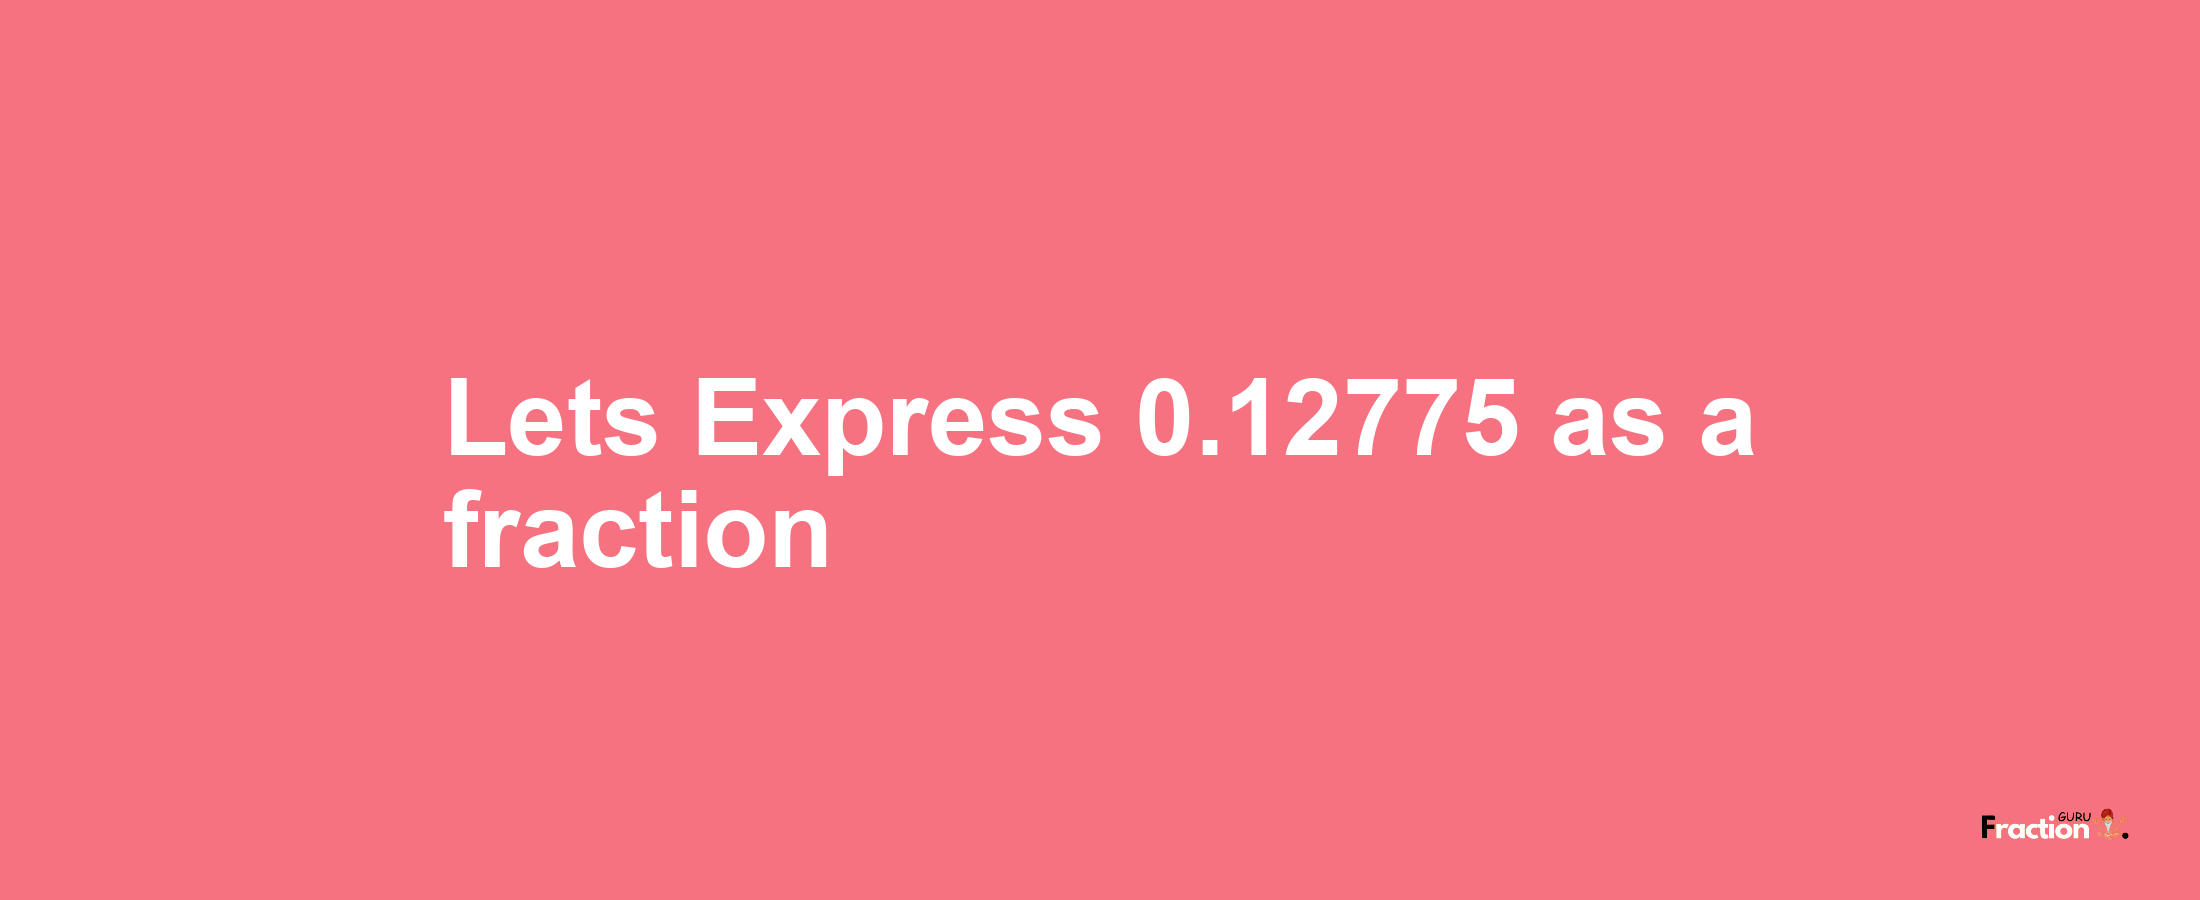 Lets Express 0.12775 as afraction